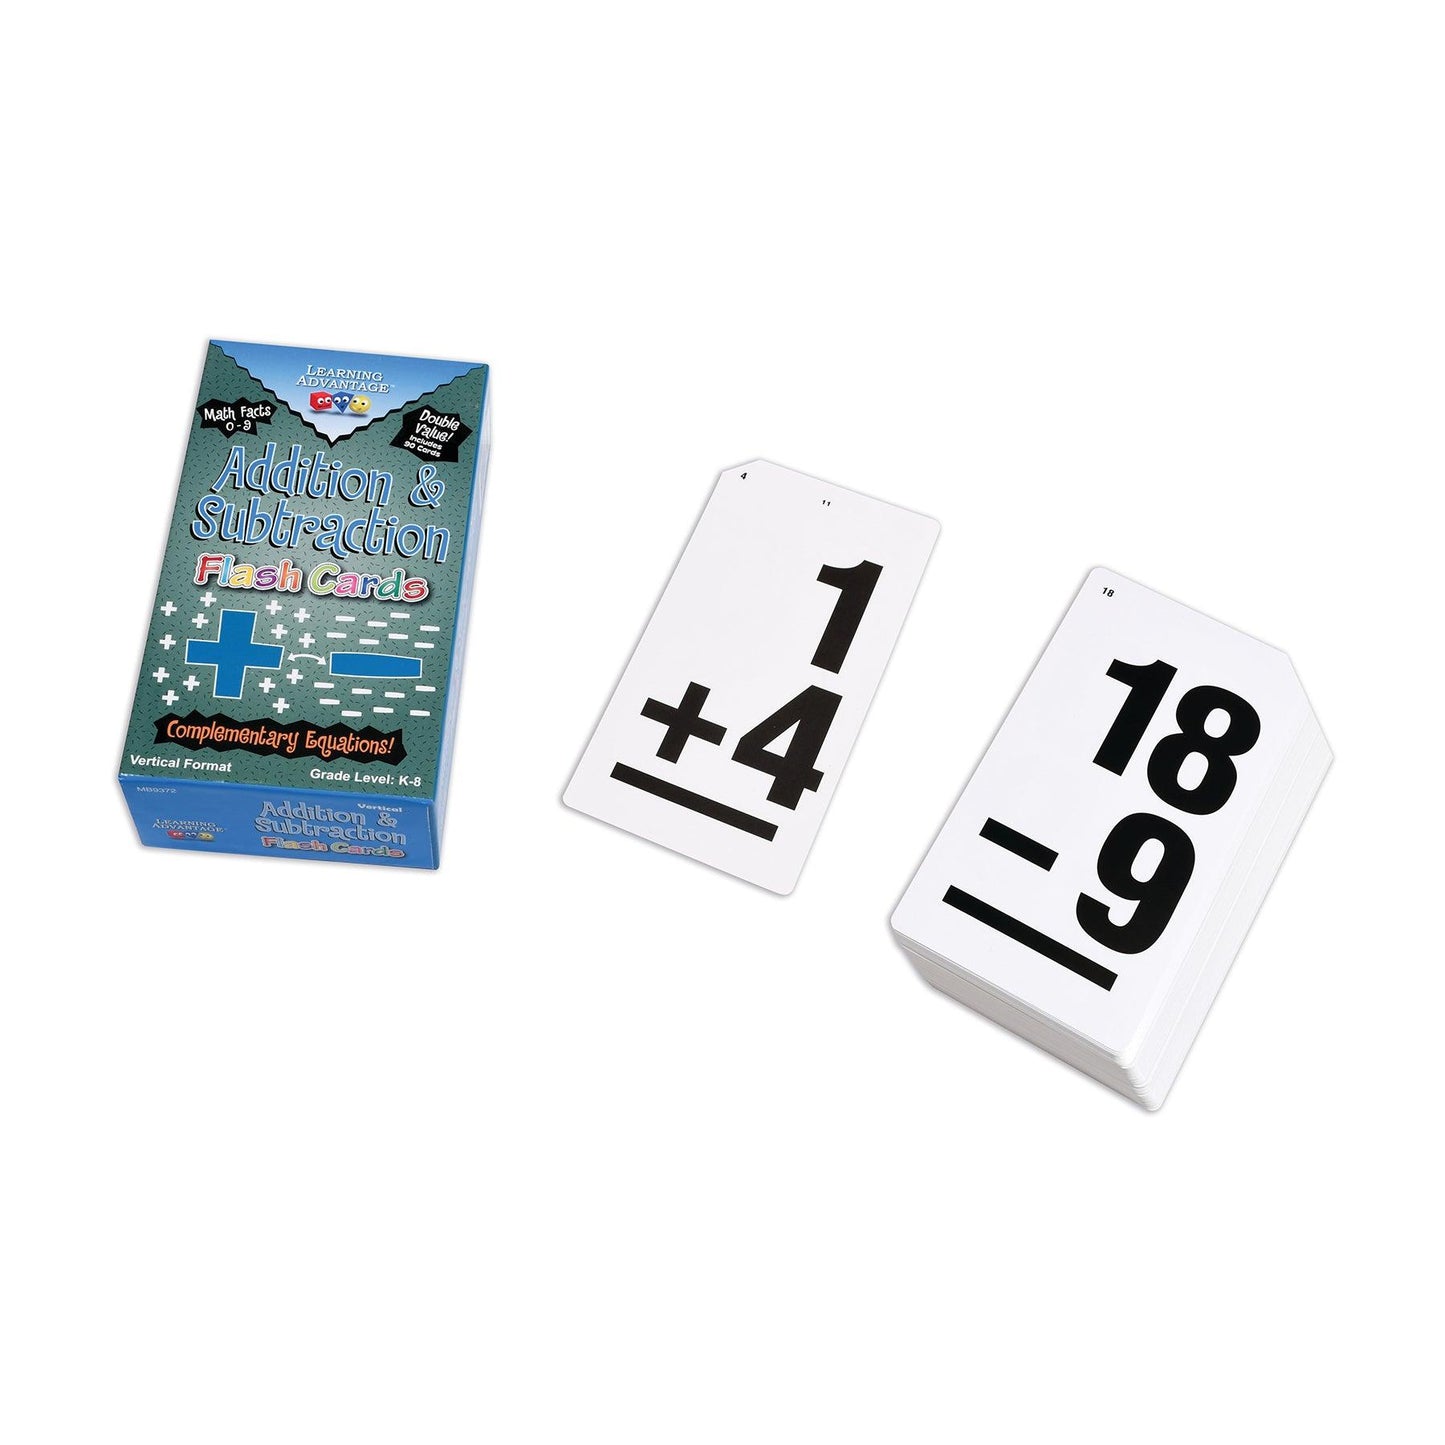 Double-Value Vertical Flash Cards - Addition & Subtraction Set - 90 Per Pack, 2 Packs